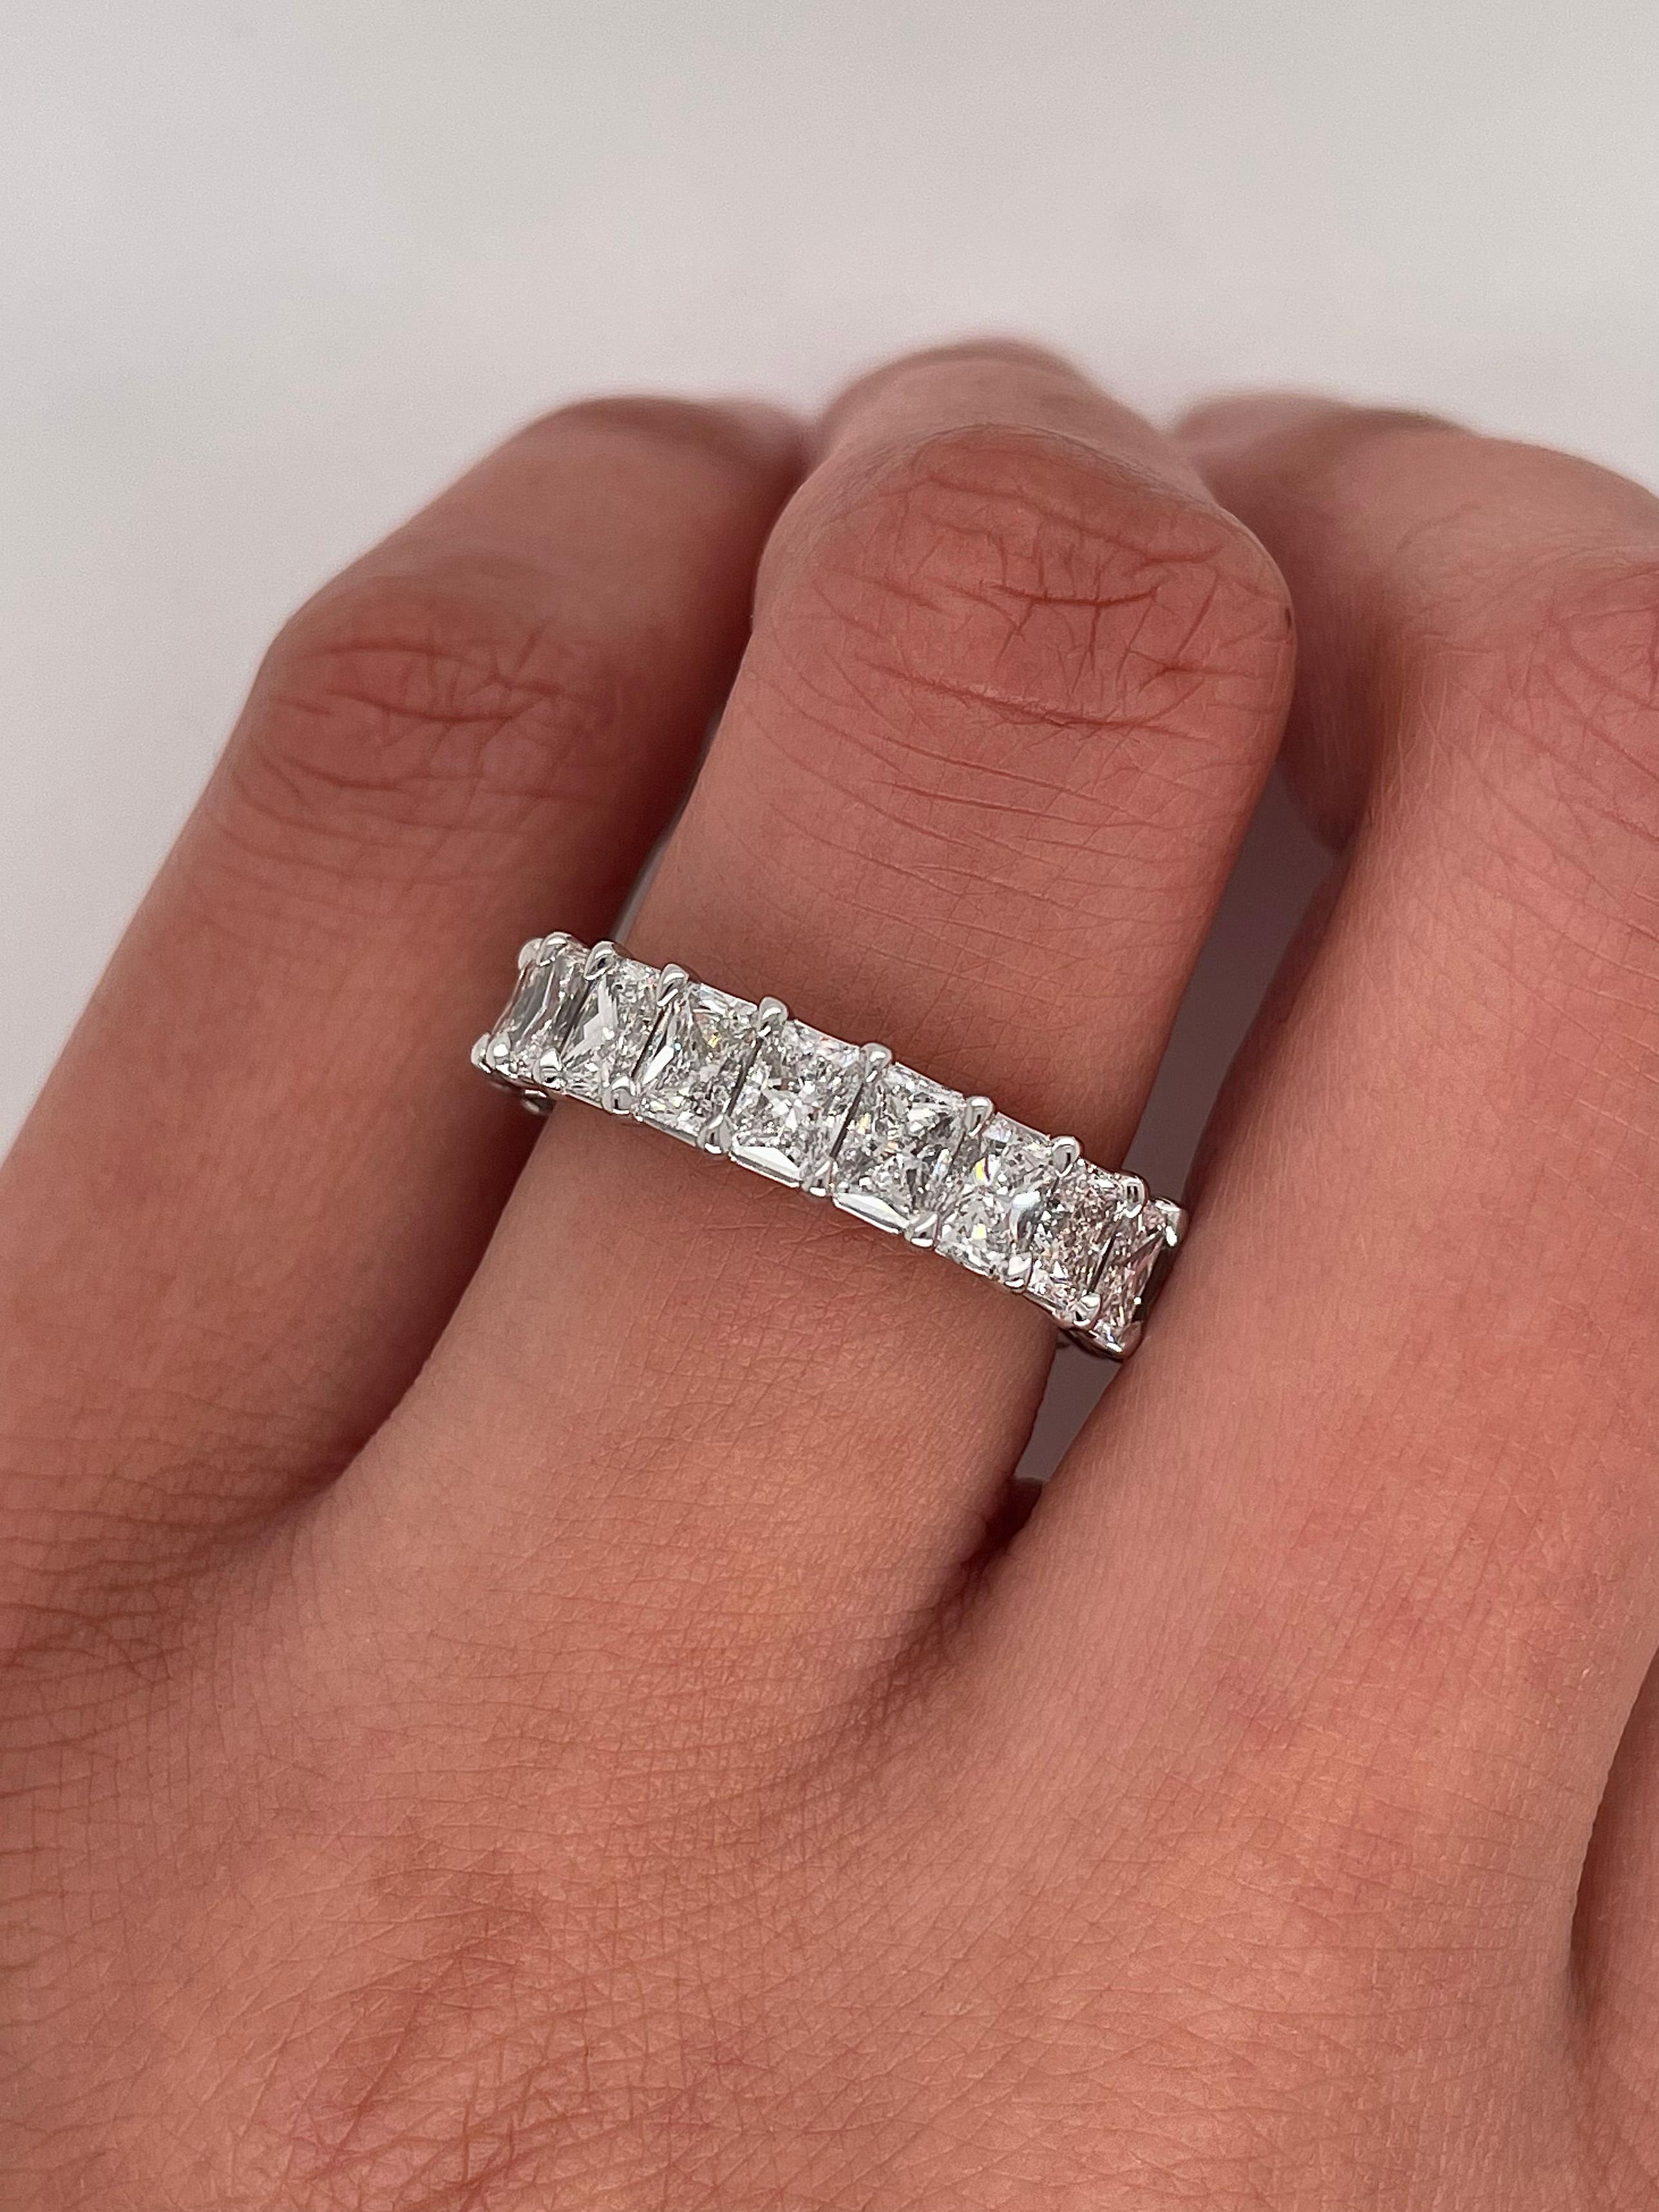 Women's 5.13 Total Carat Shared Prong Diamond Eternity Band in Platinum For Sale